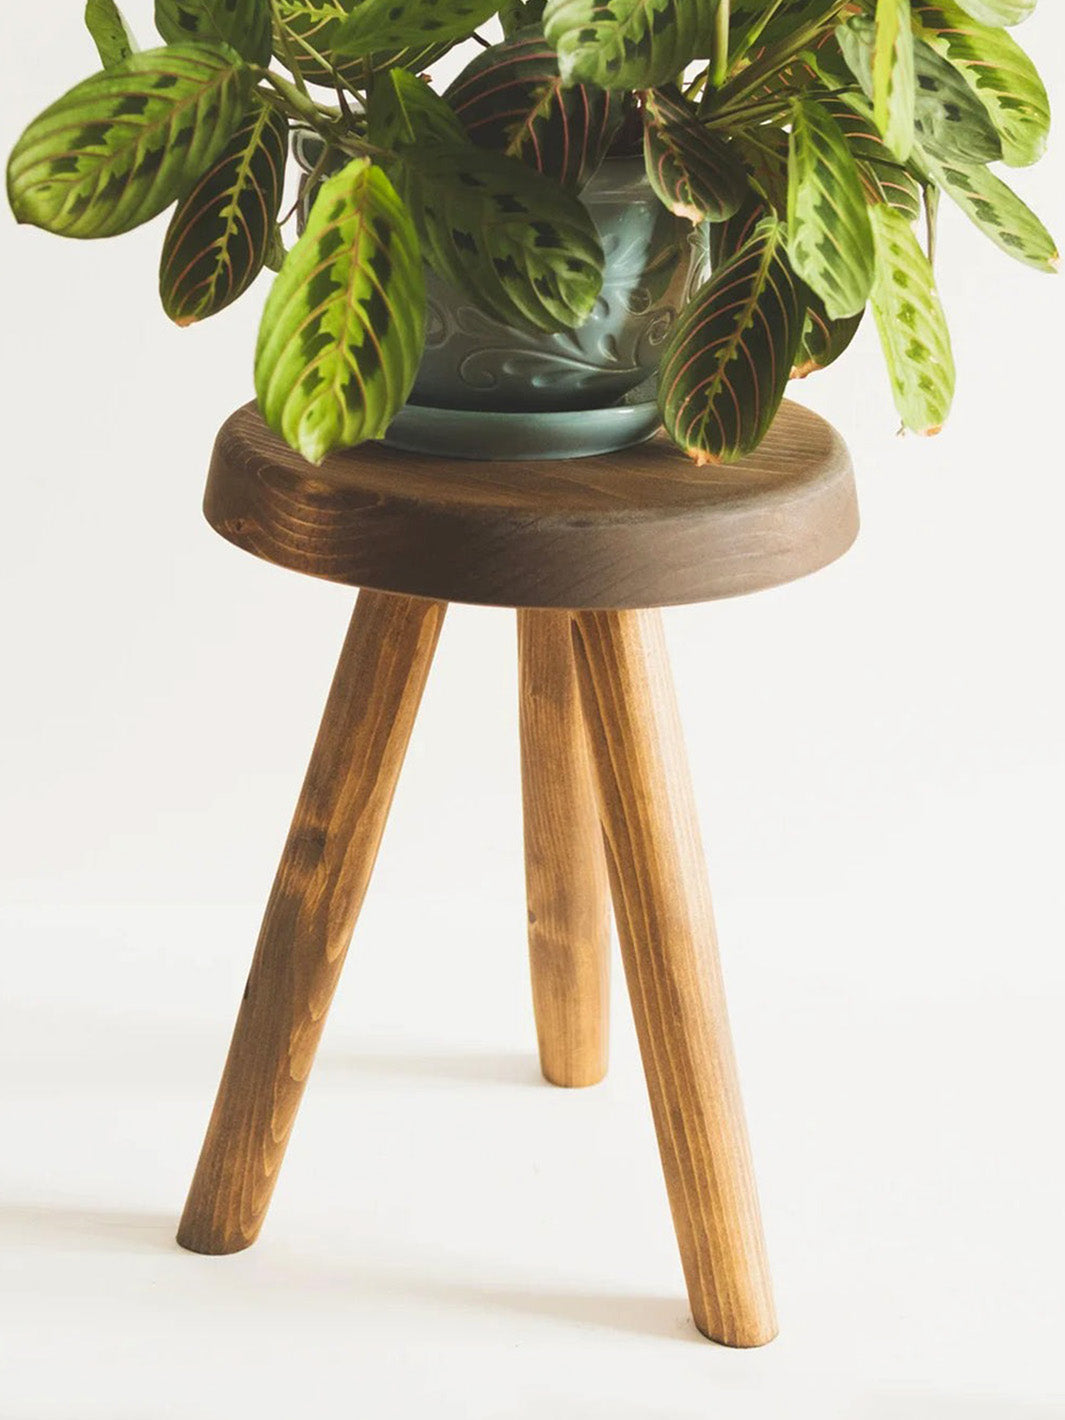 Handcrafted Wooden Tripod Plant Stool FTN Pots & Planters FTN0056-2